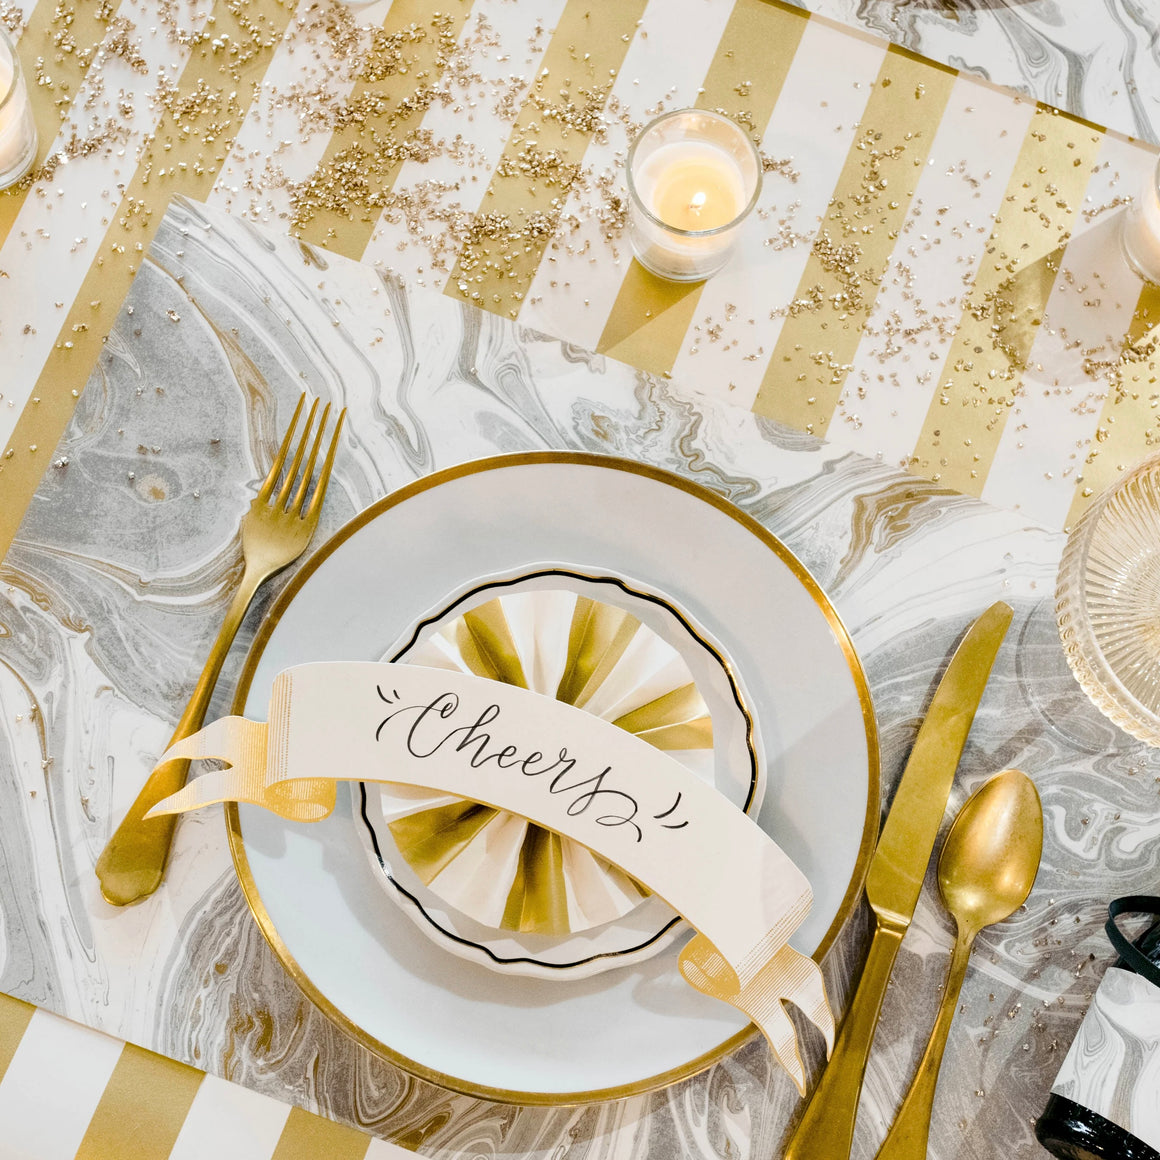 TABLE ACCENT - CLASSIC GOLD BANNER